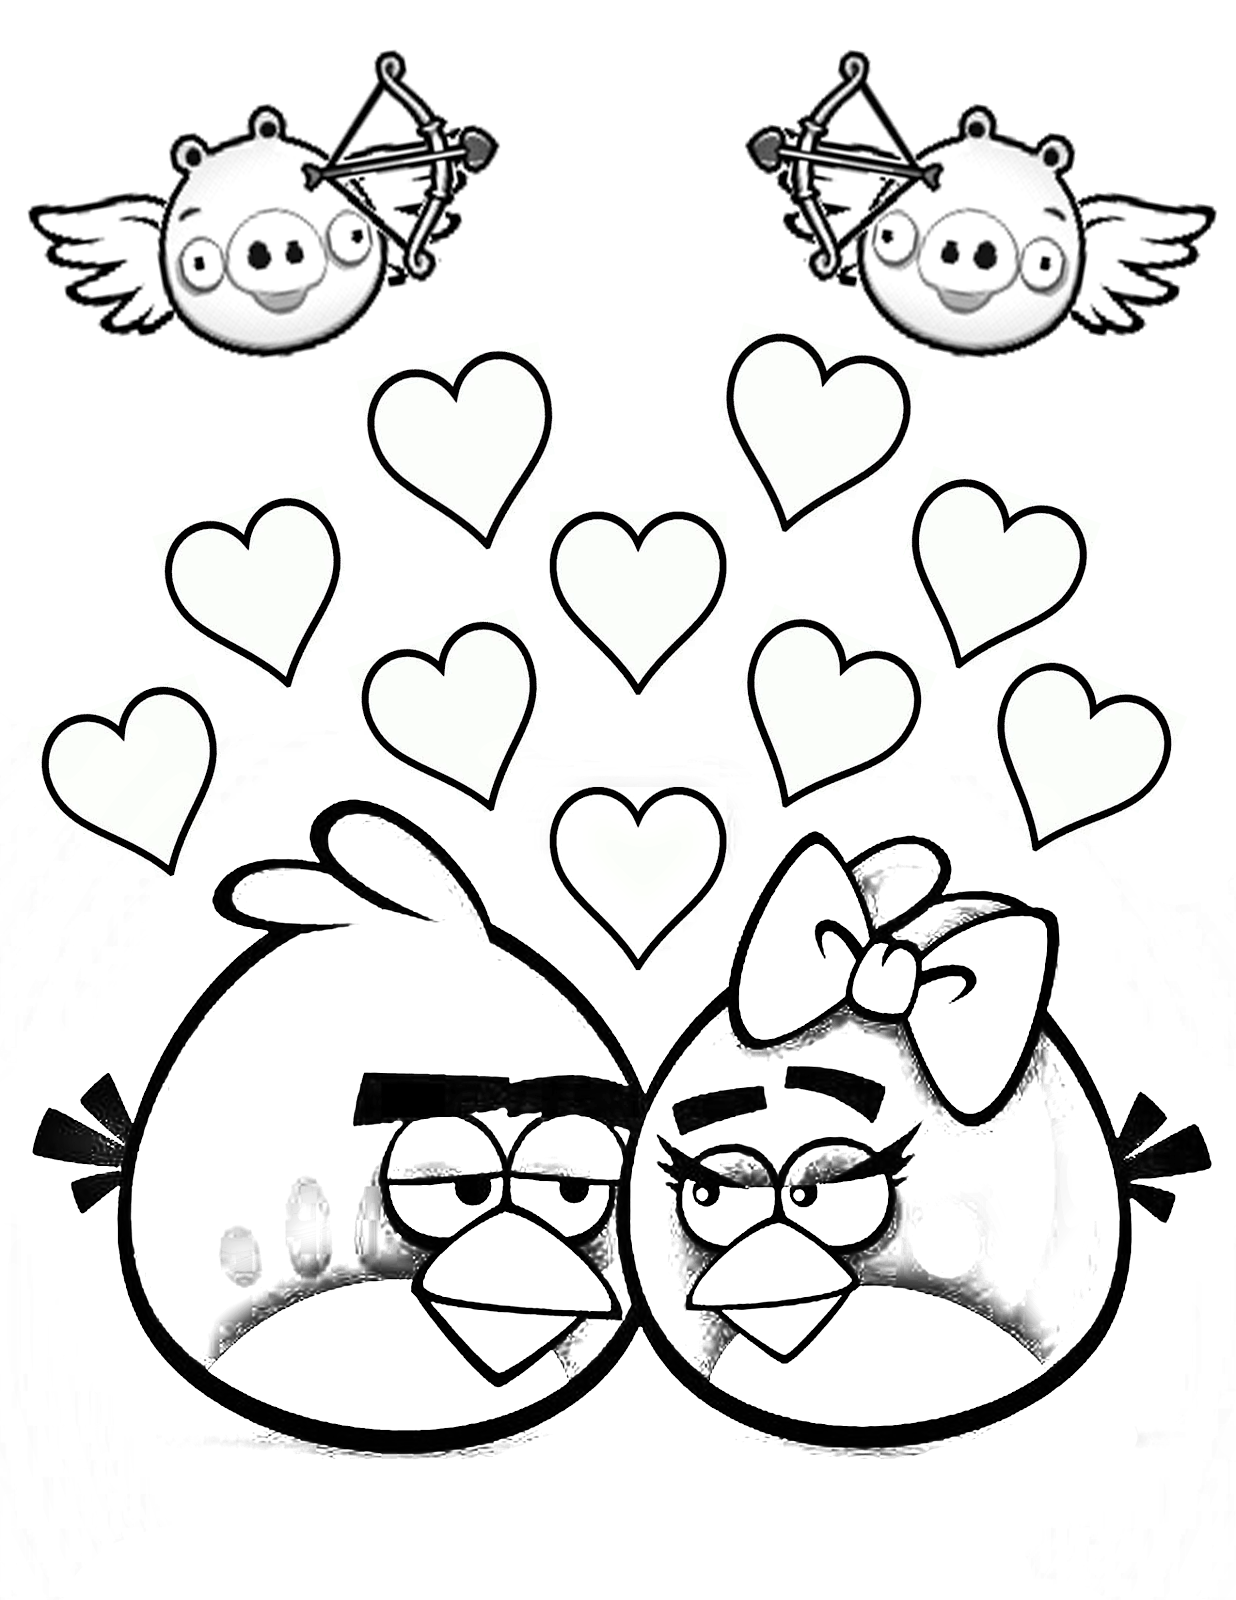 Angry Birds Valentine's day coloring pages